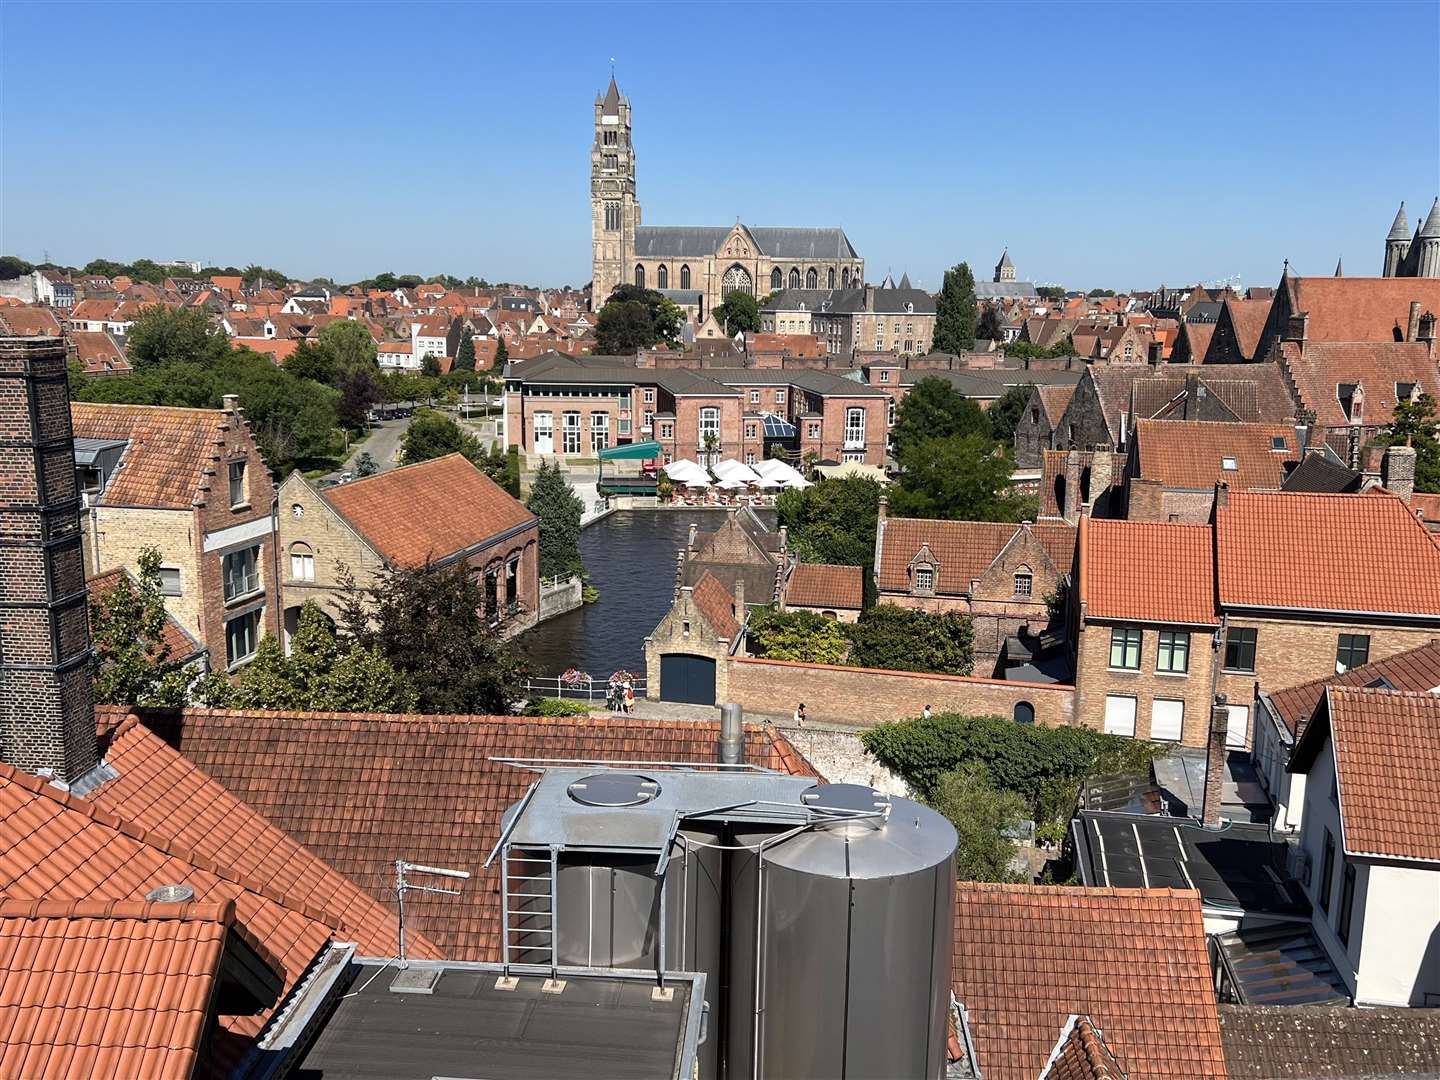 The view of Bruges from the top of the De Halve Mann brewery